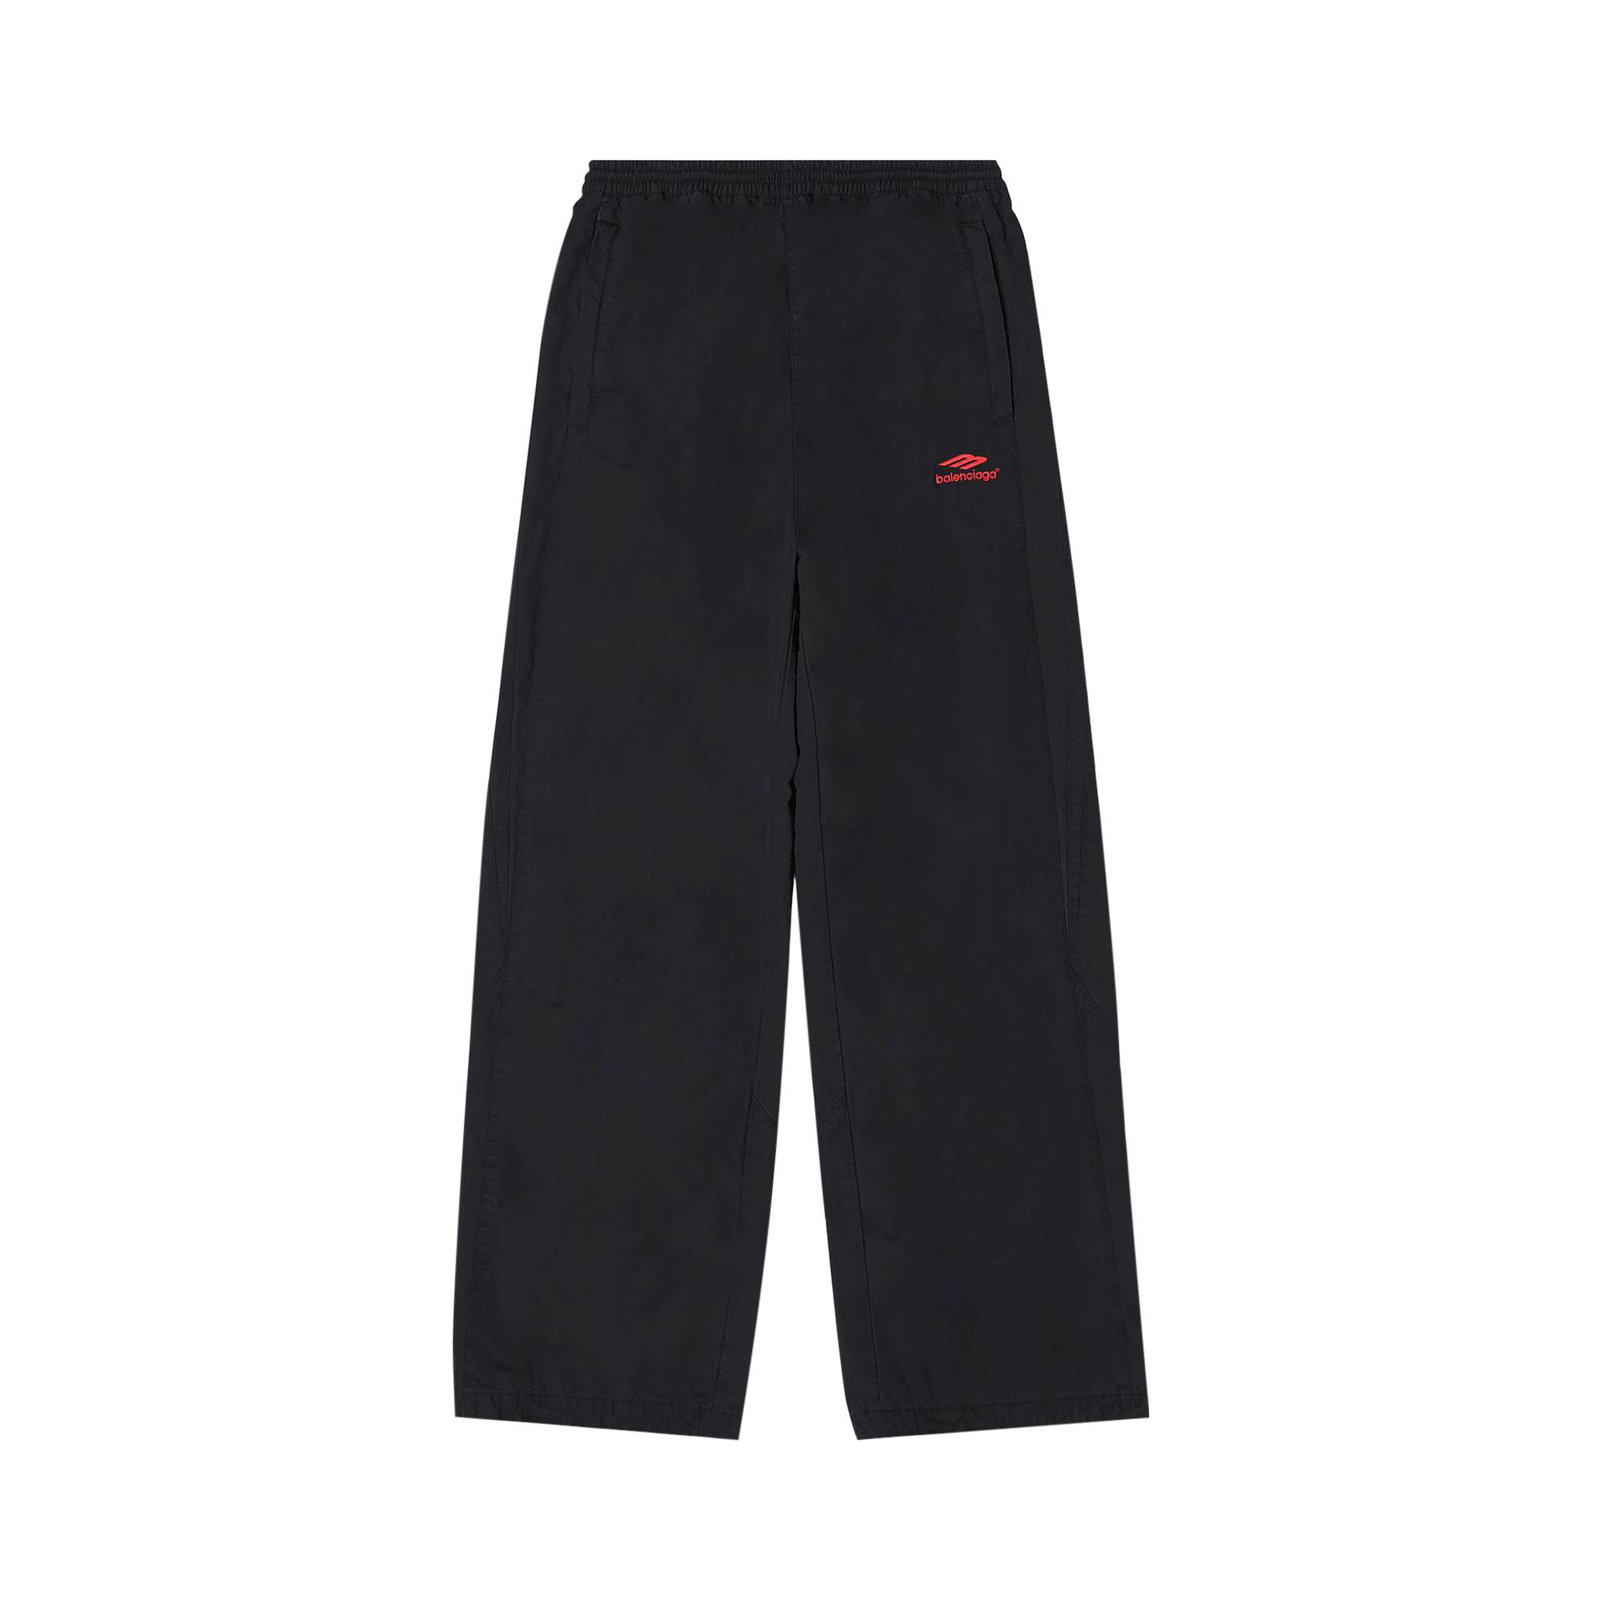 Balenciaga x adidas Trefoil Track Suit Tracksuit Bottoms  Where To Buy   IB5239  The Sole Supplier